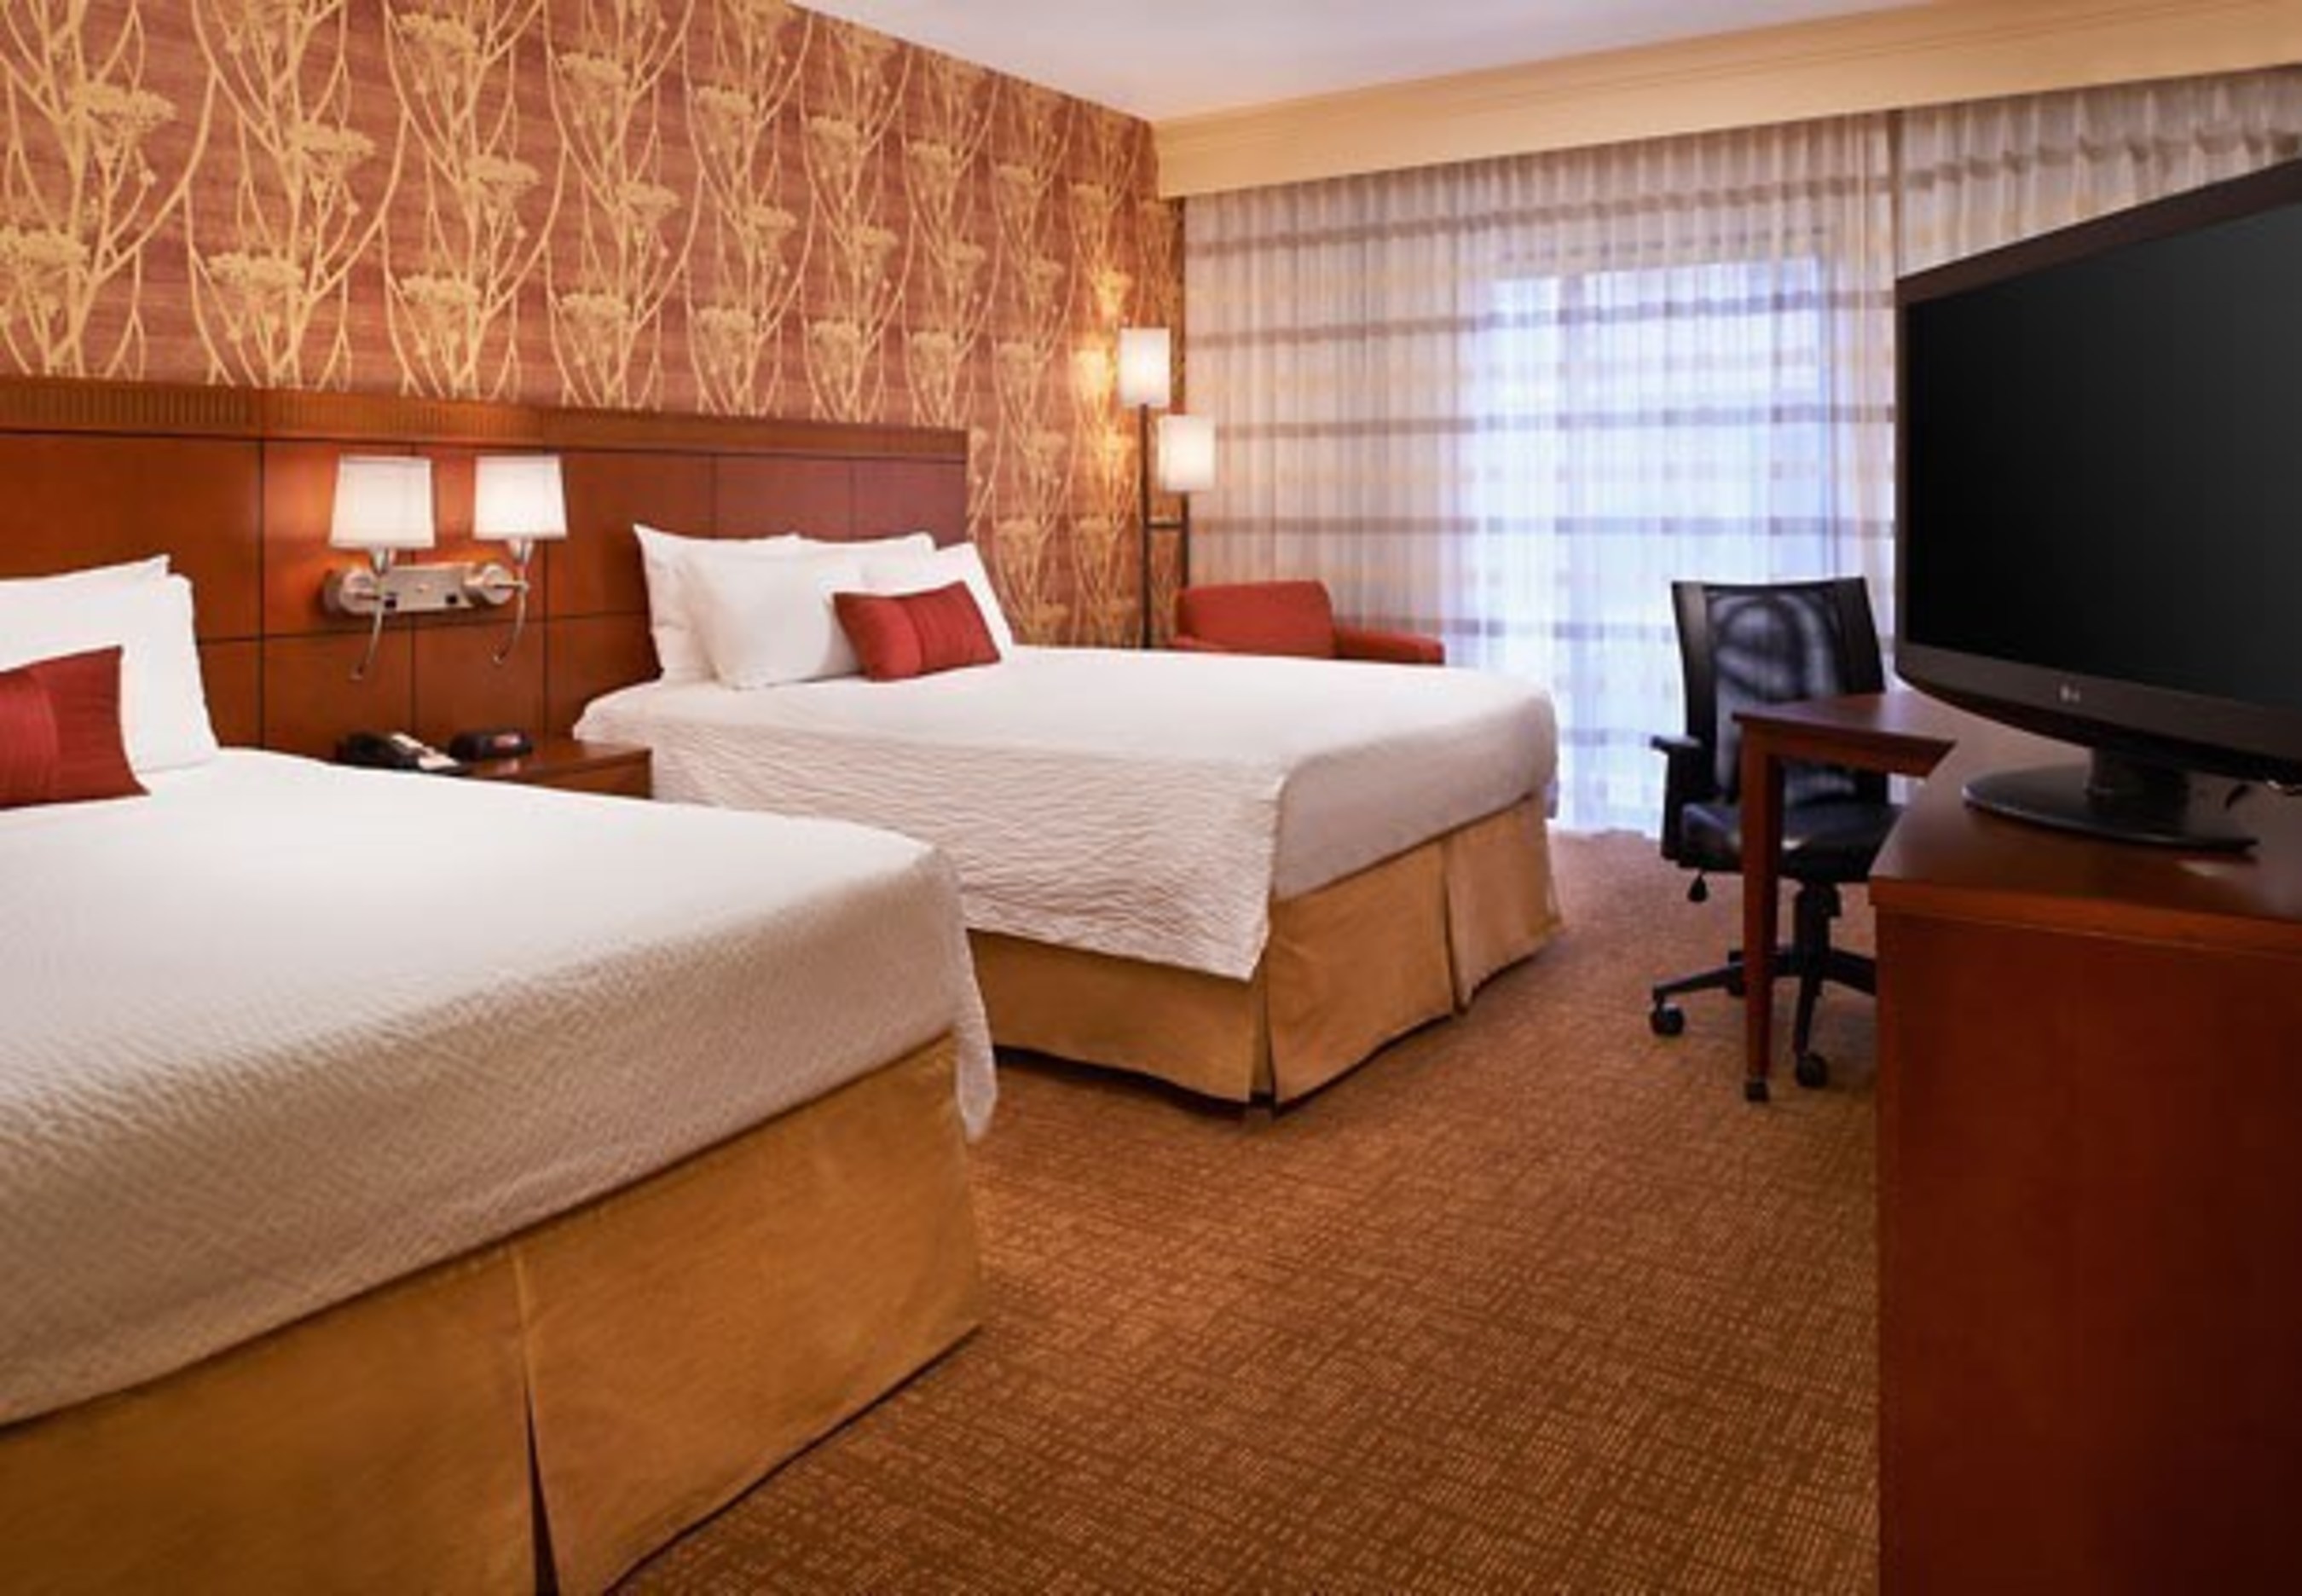 Music lovers heading to the 2015 Ravinia Festival can take advantage of overnight accommodations, transportation to/from the festival and a picnic lunch with a special deal from Courtyard Chicago Highland Park/Northbrook. For information, visit www.marriott.com/CHIHP or call 1-847-831-3338.